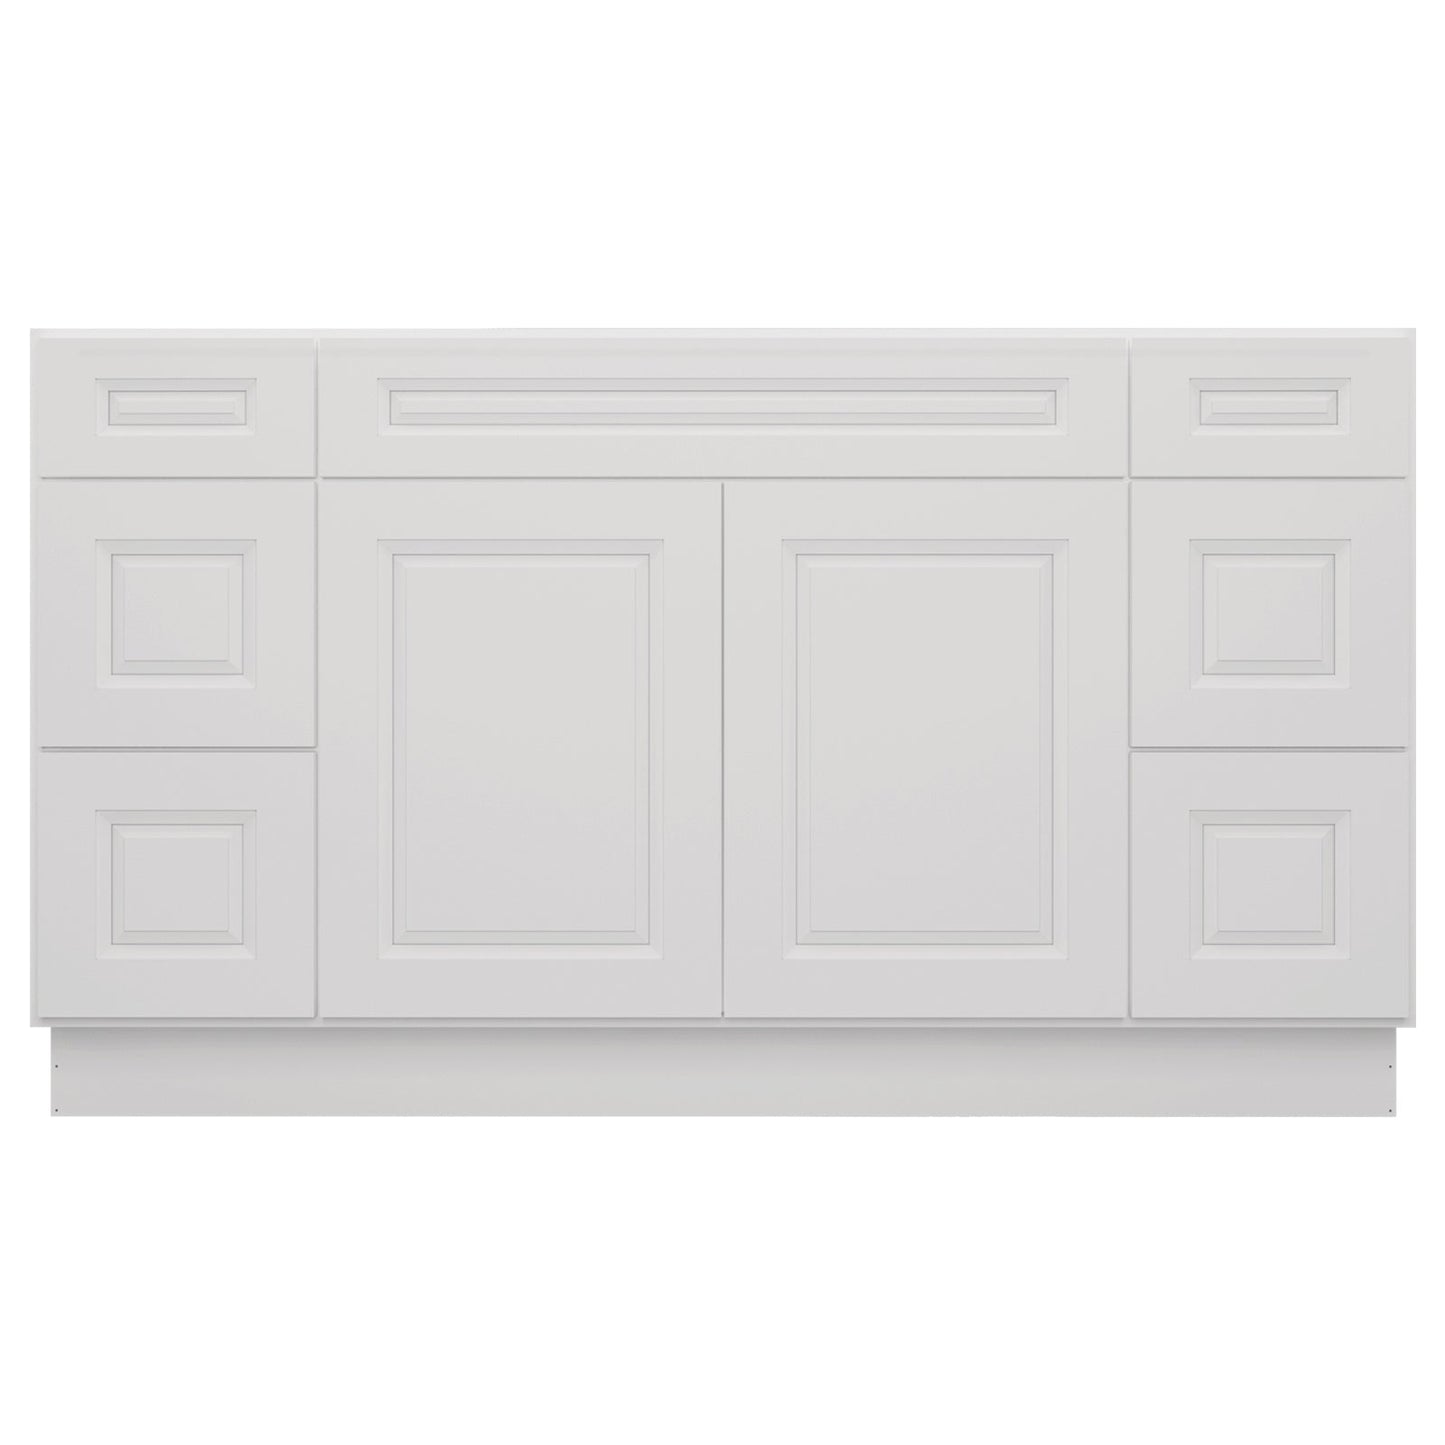 21"D Birch Solid Wood X48"W X 21"D X 34-1/2"H Bath Vanity Sink Drawer Cabinet without Top VDDB48